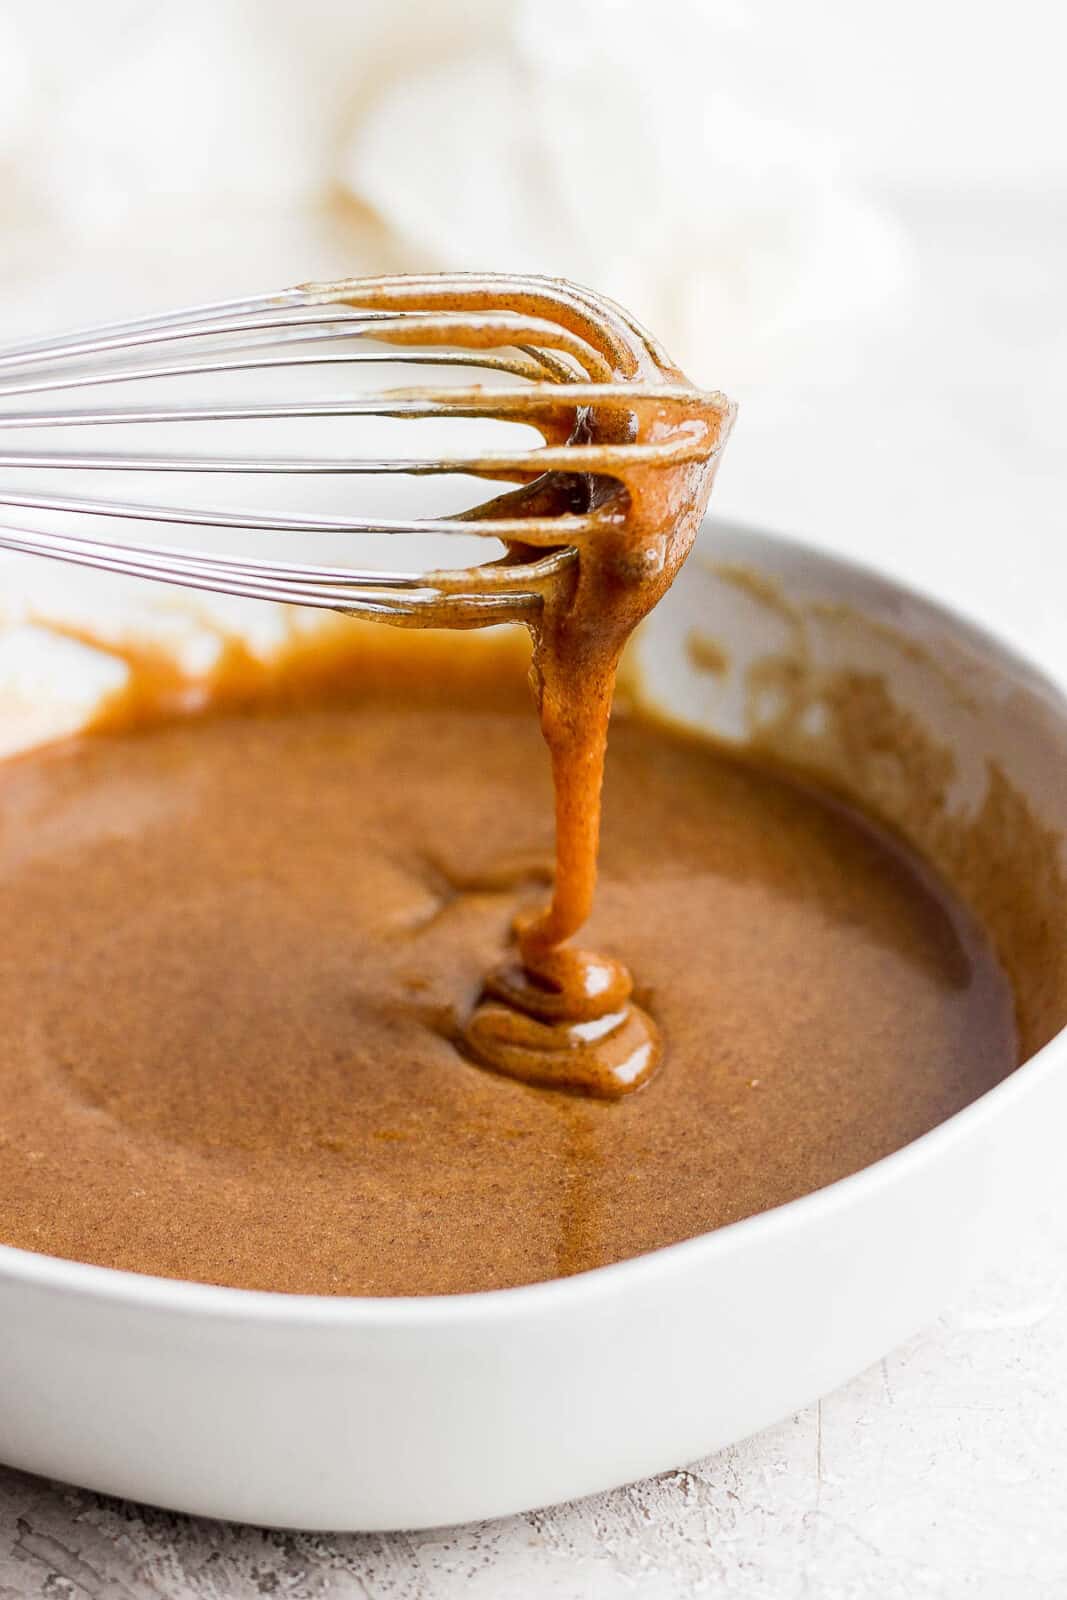 The glaze dripping off the whisk.